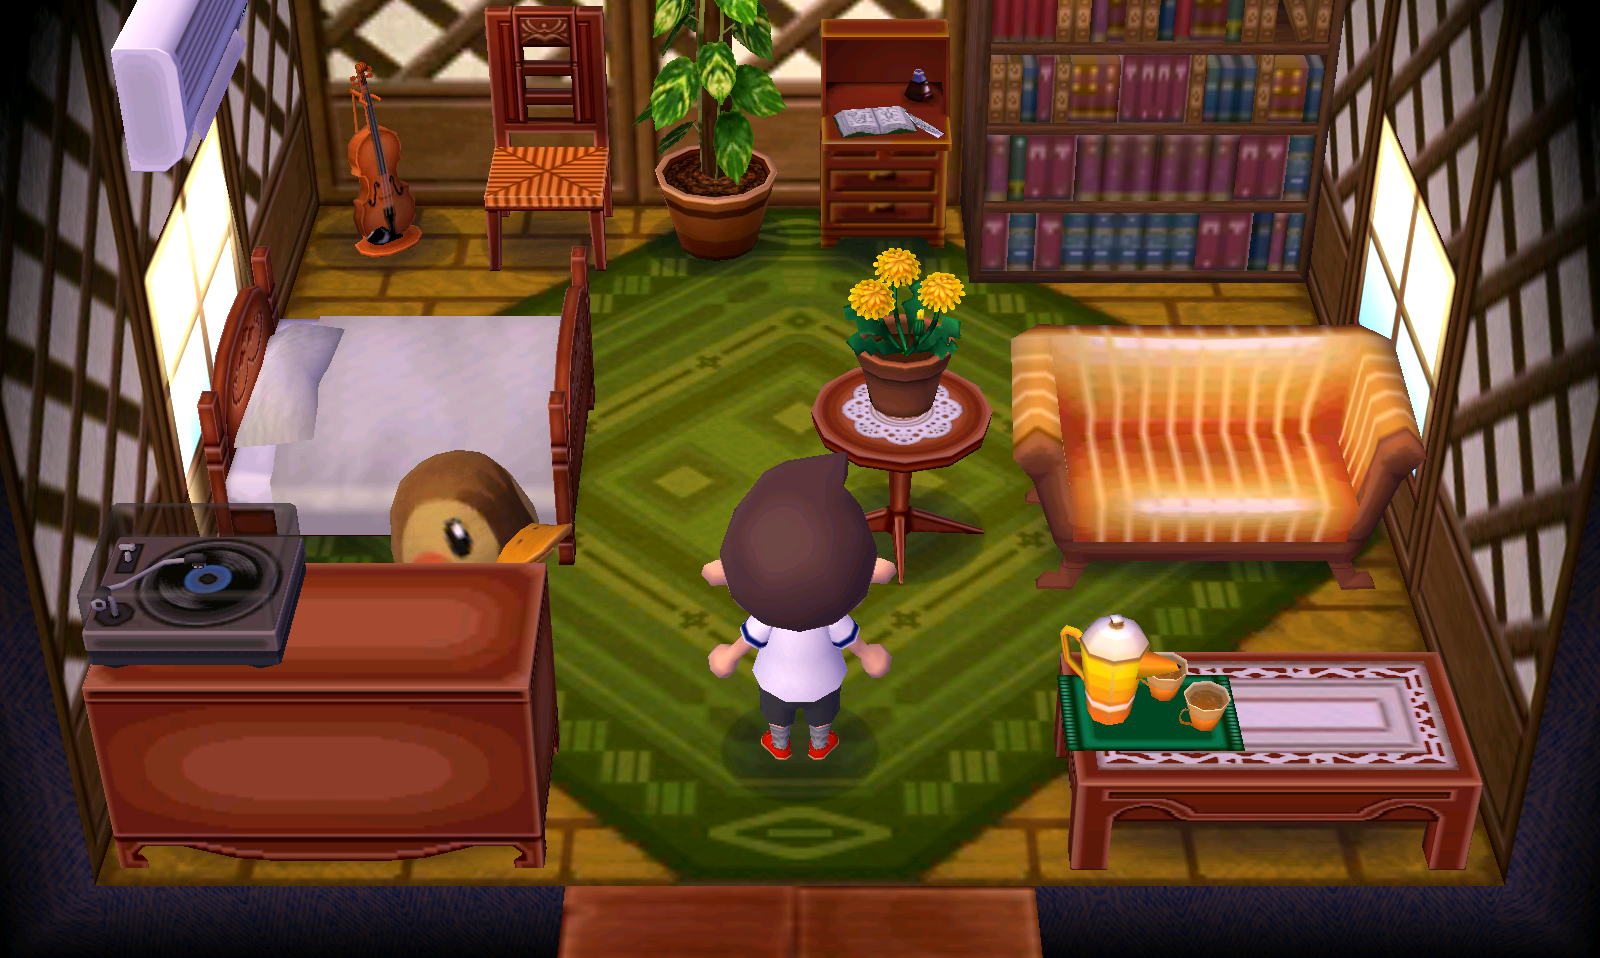 Interior of Molly's house in Animal Crossing: New Leaf